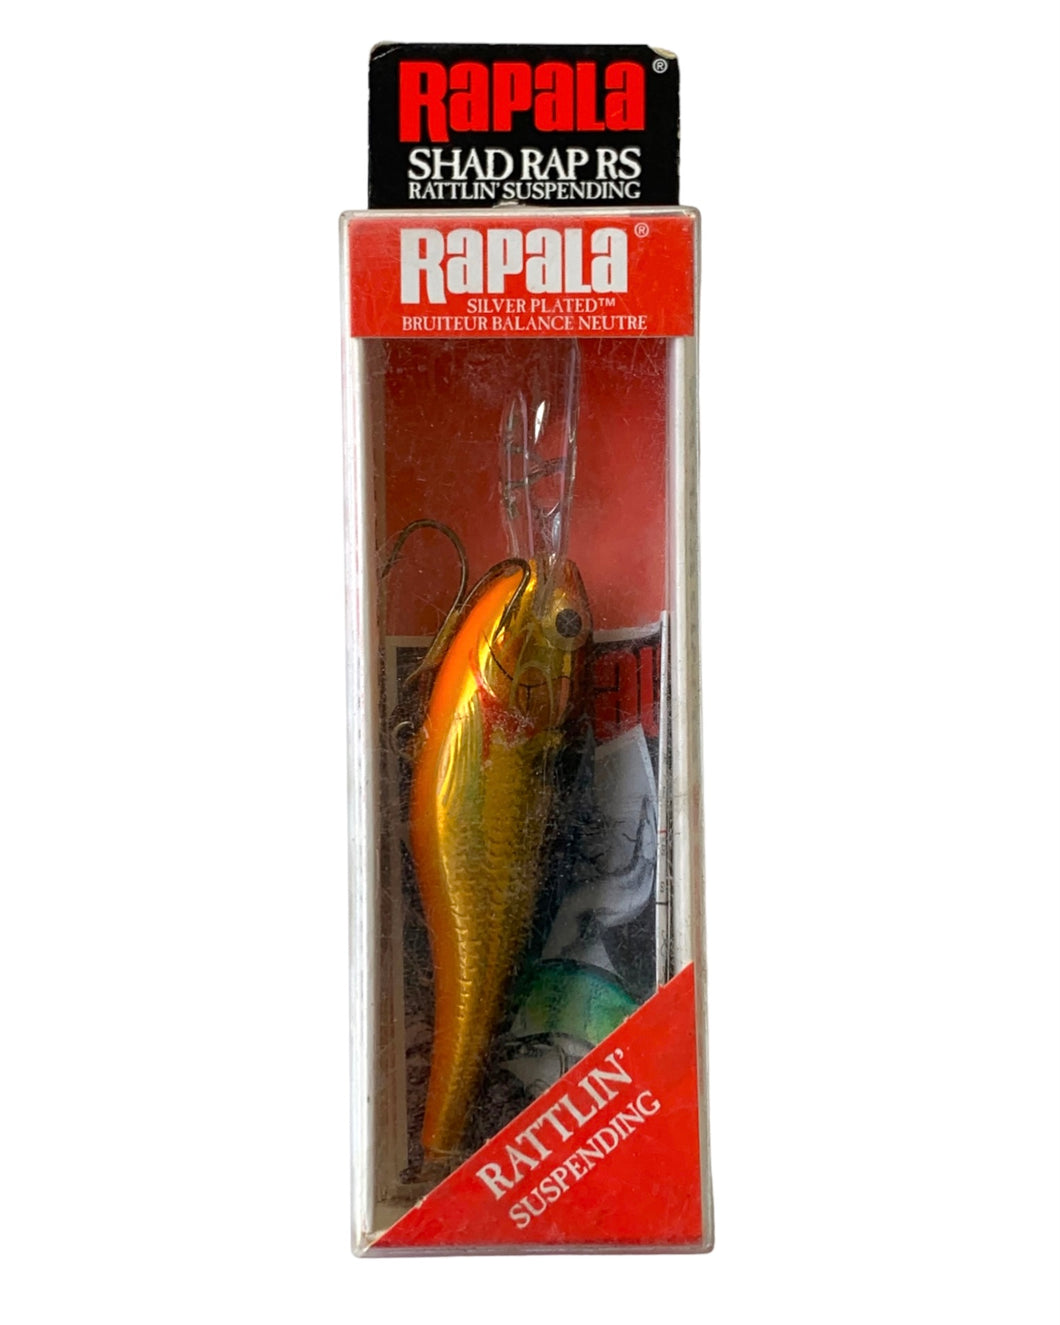 SILVER PLATED • RAPALA Size 7 SHAD RAP RS RATTLIN SUSPENDING Fishing Lure • SRRS-7 SG GOLD